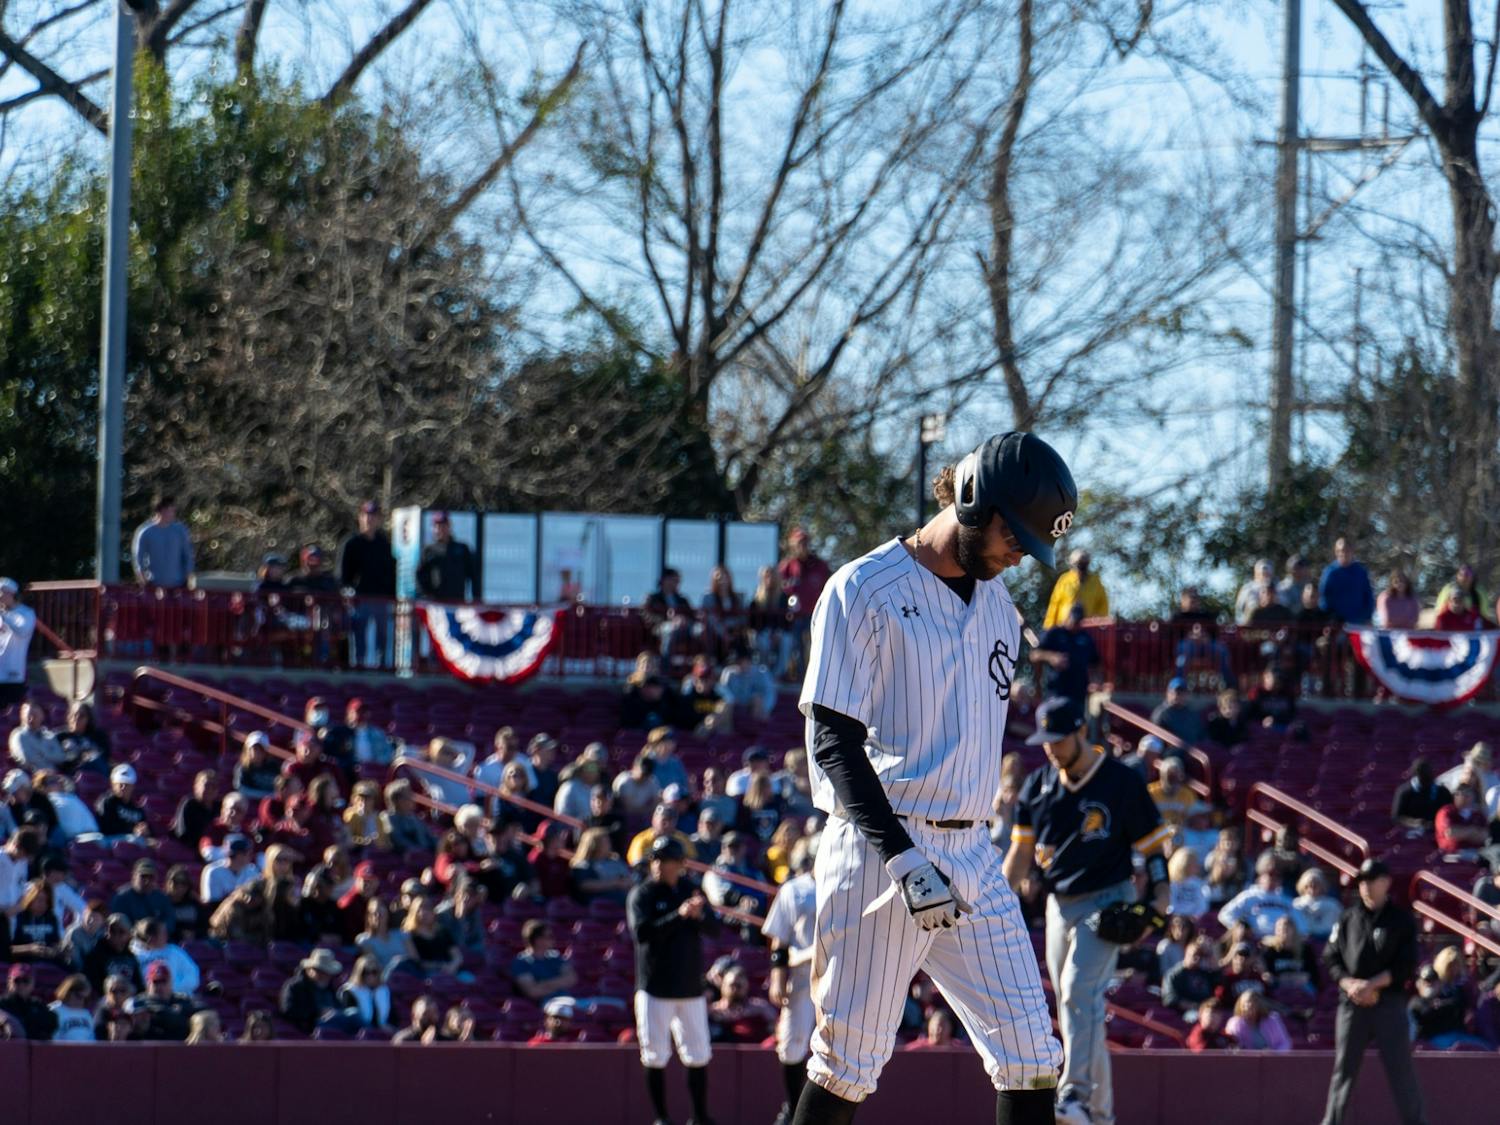 USC Senior Brandt Belk walks across the field at Founders Park on Feb. 19, 2022. Carolina lost their second game of their series with UNCG 4-5. 